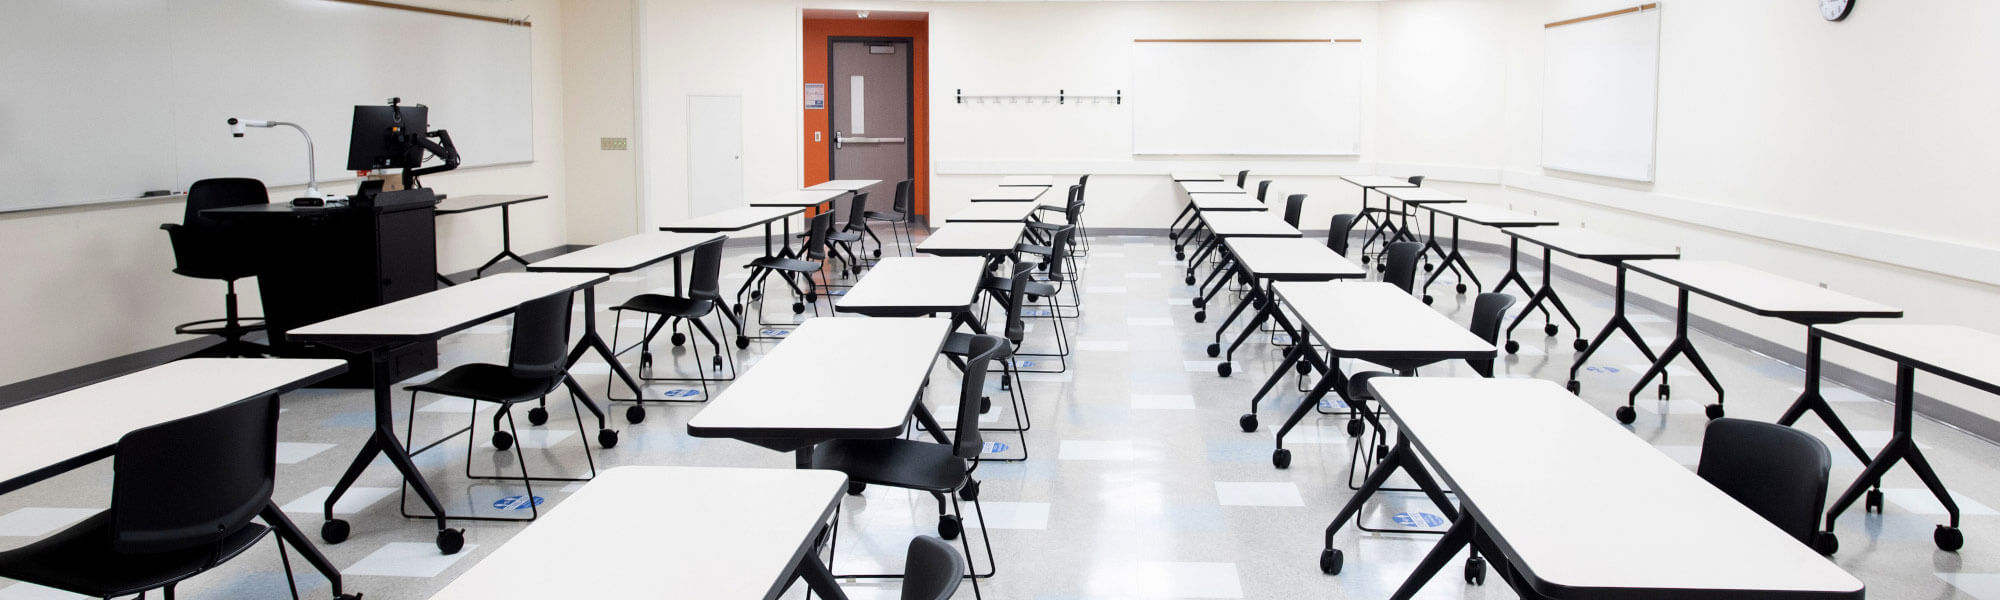 Photograph of a classroom with rows of tables and chairs.